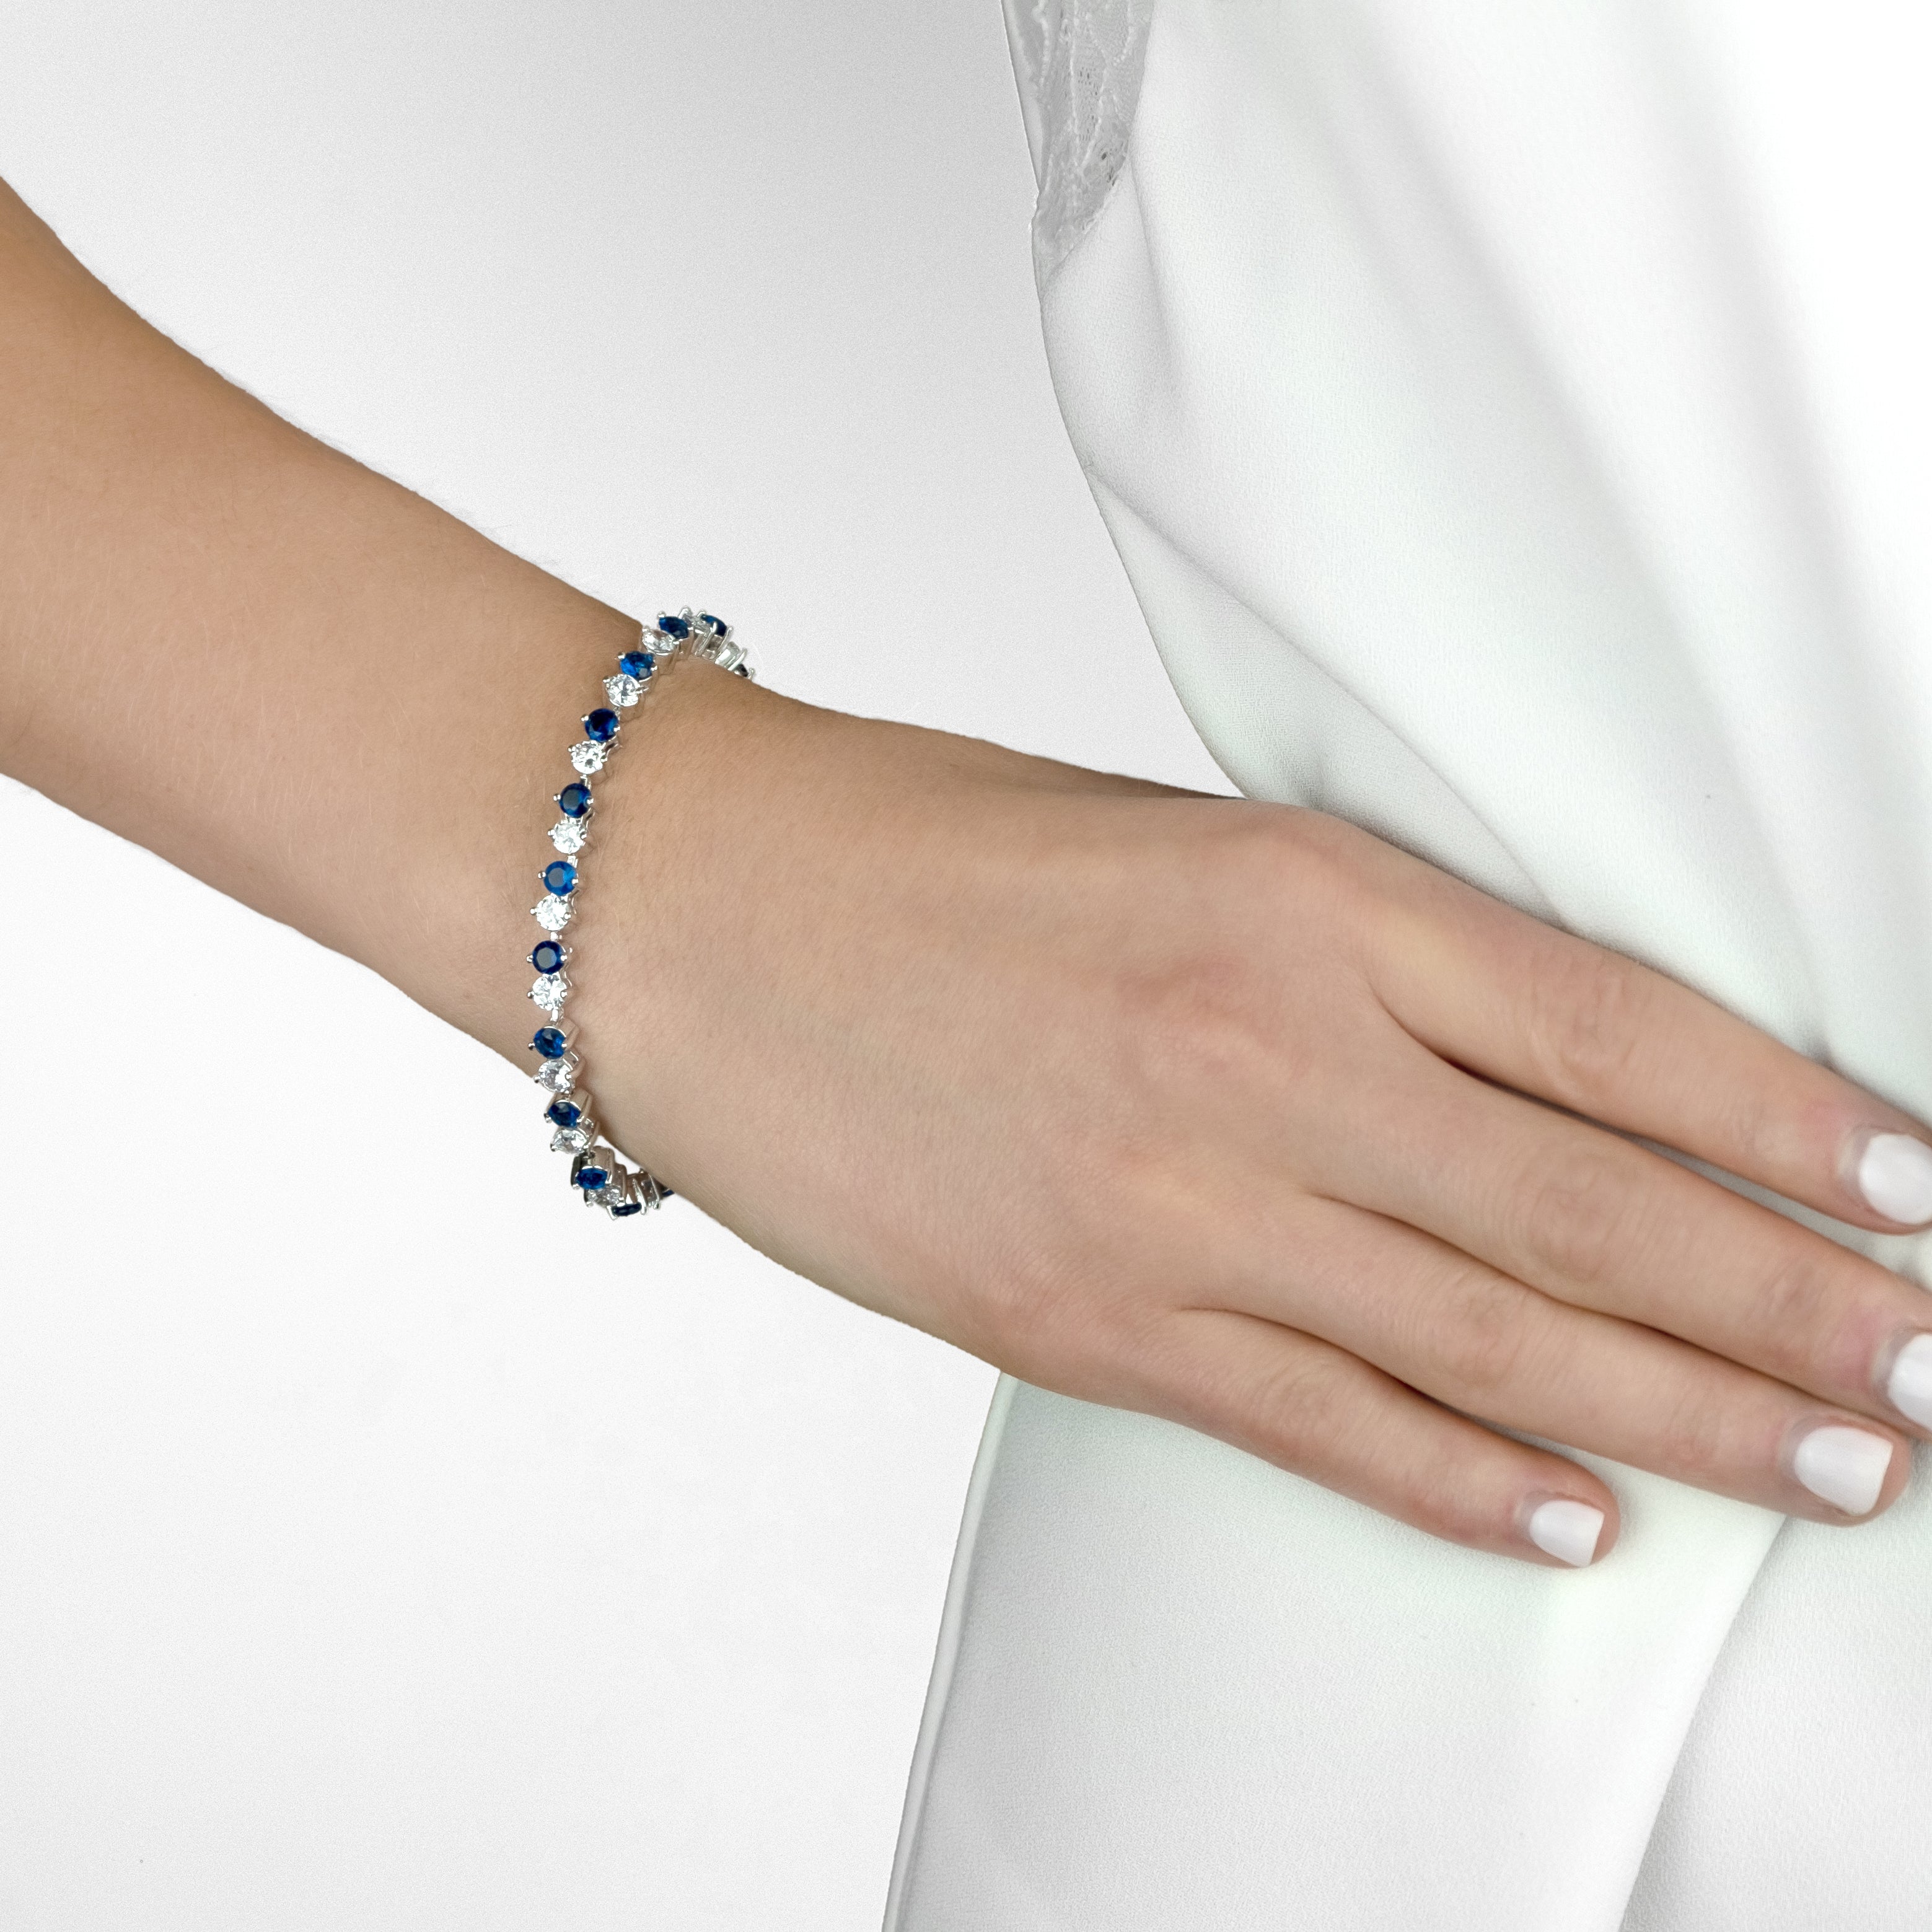 Purity Bracelet with Blue Crystals and Extra Link